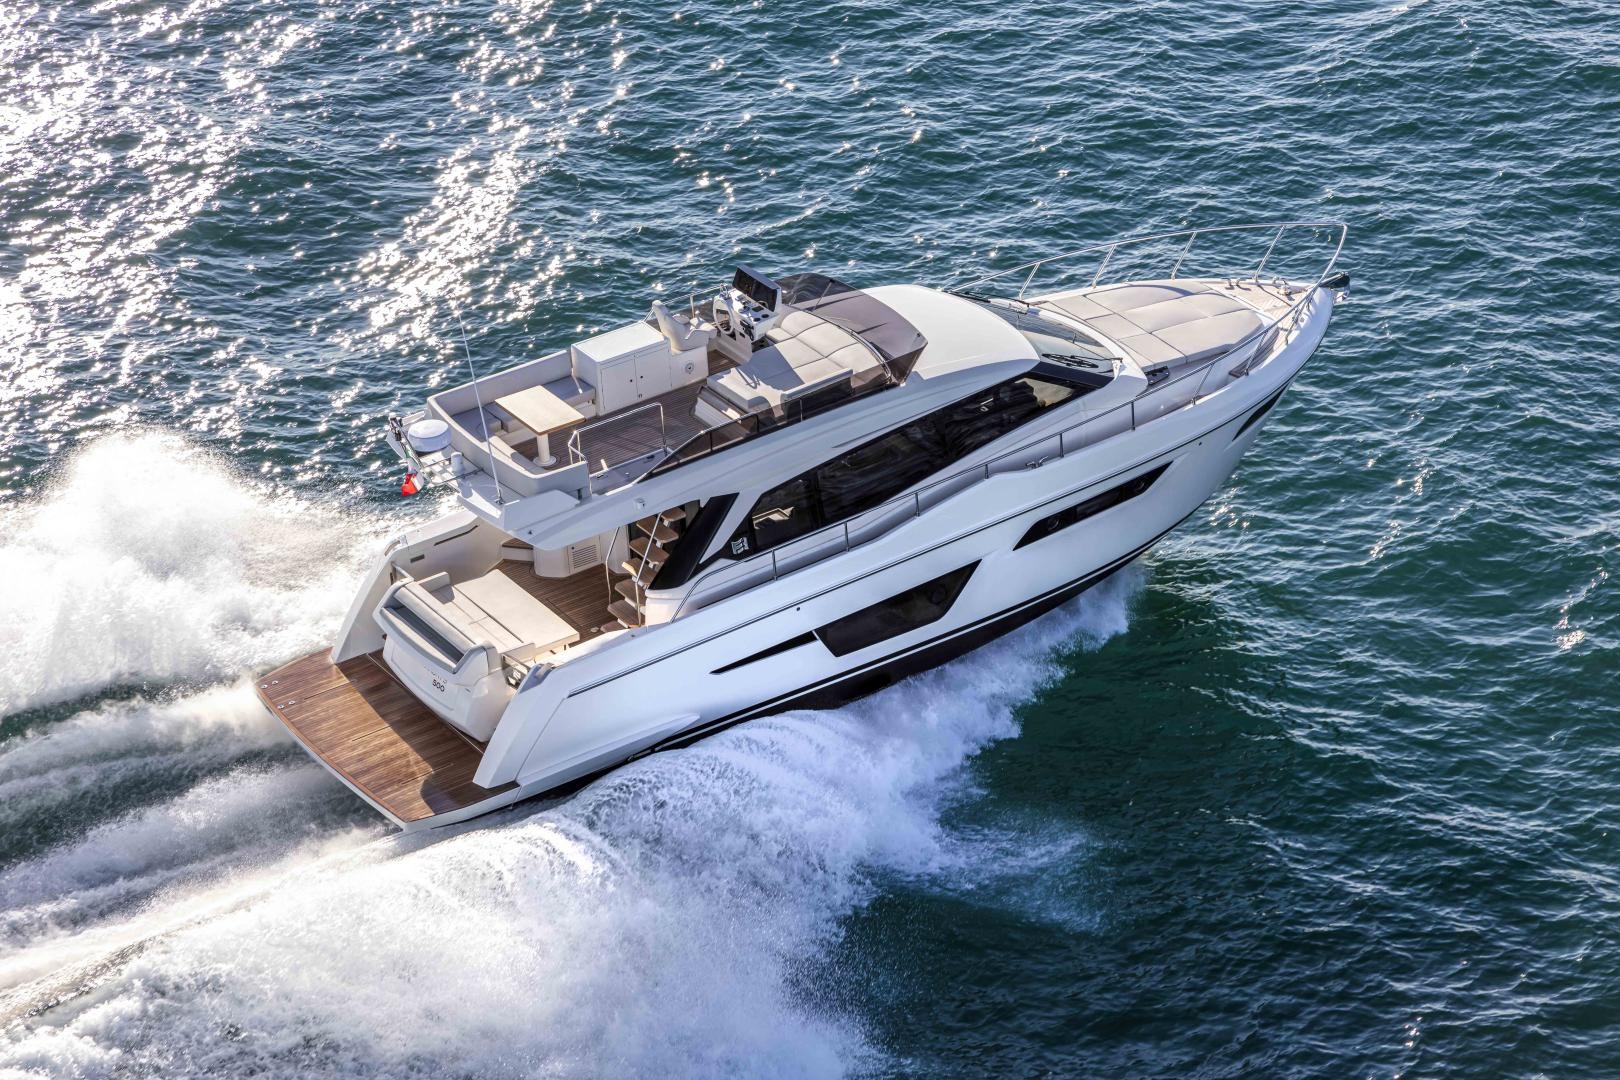 The new Ferretti Yachts 500: just like home on the water